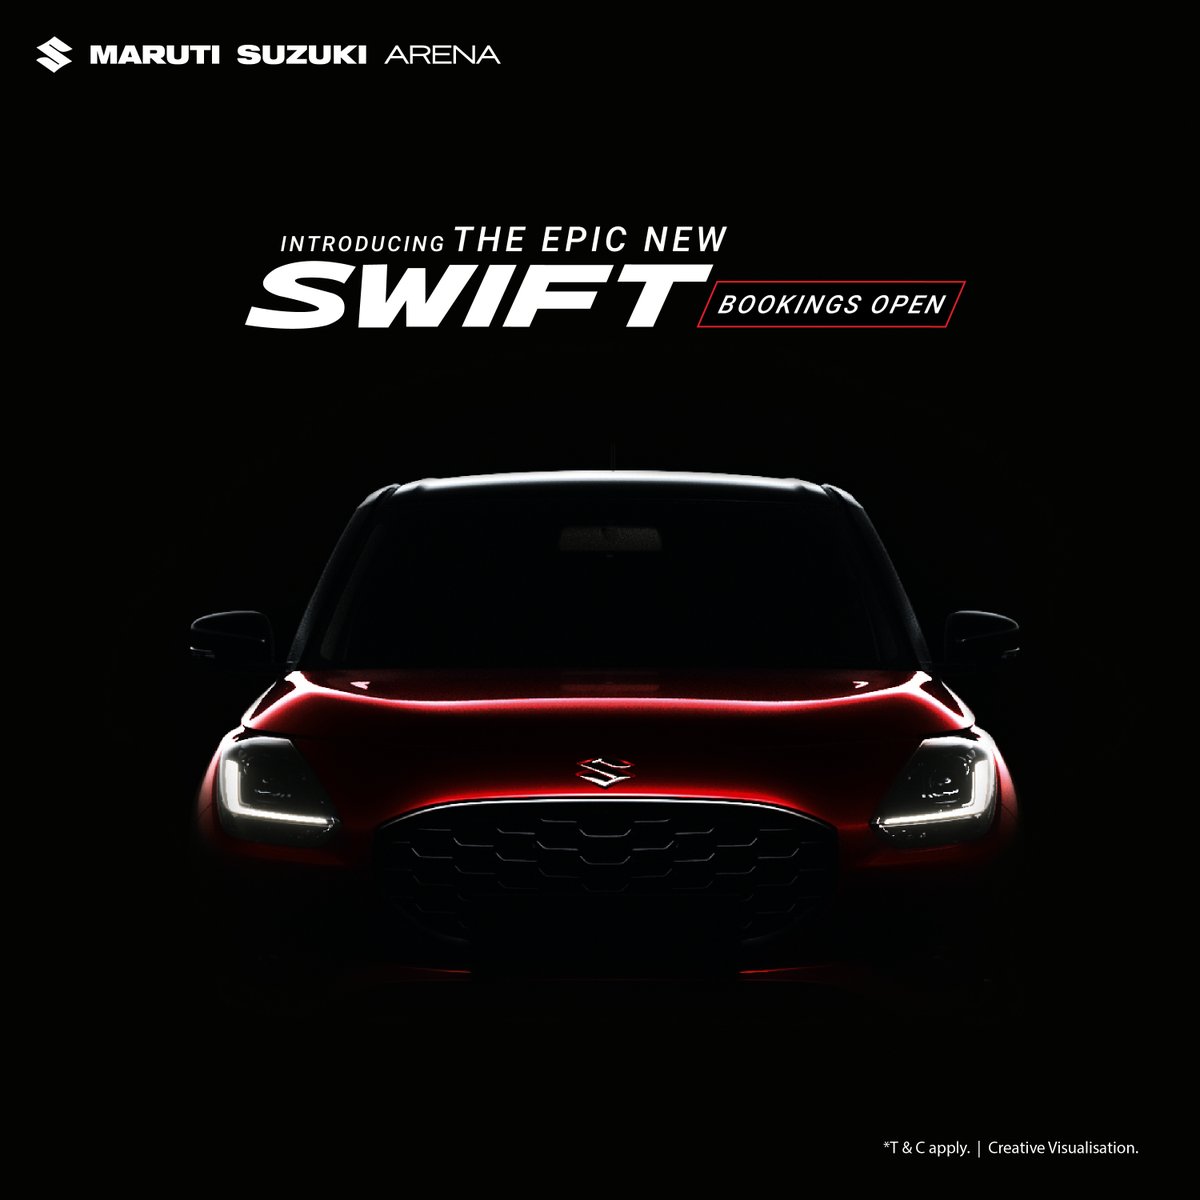 19 years ago, the SWIFT started a driving revolution. And today, it's a cultural icon. It's time to fall back in love with driving with the Epic New SWIFT. 
#EpicNewSwift #MarutiSuzukiArena #BookingsOpen